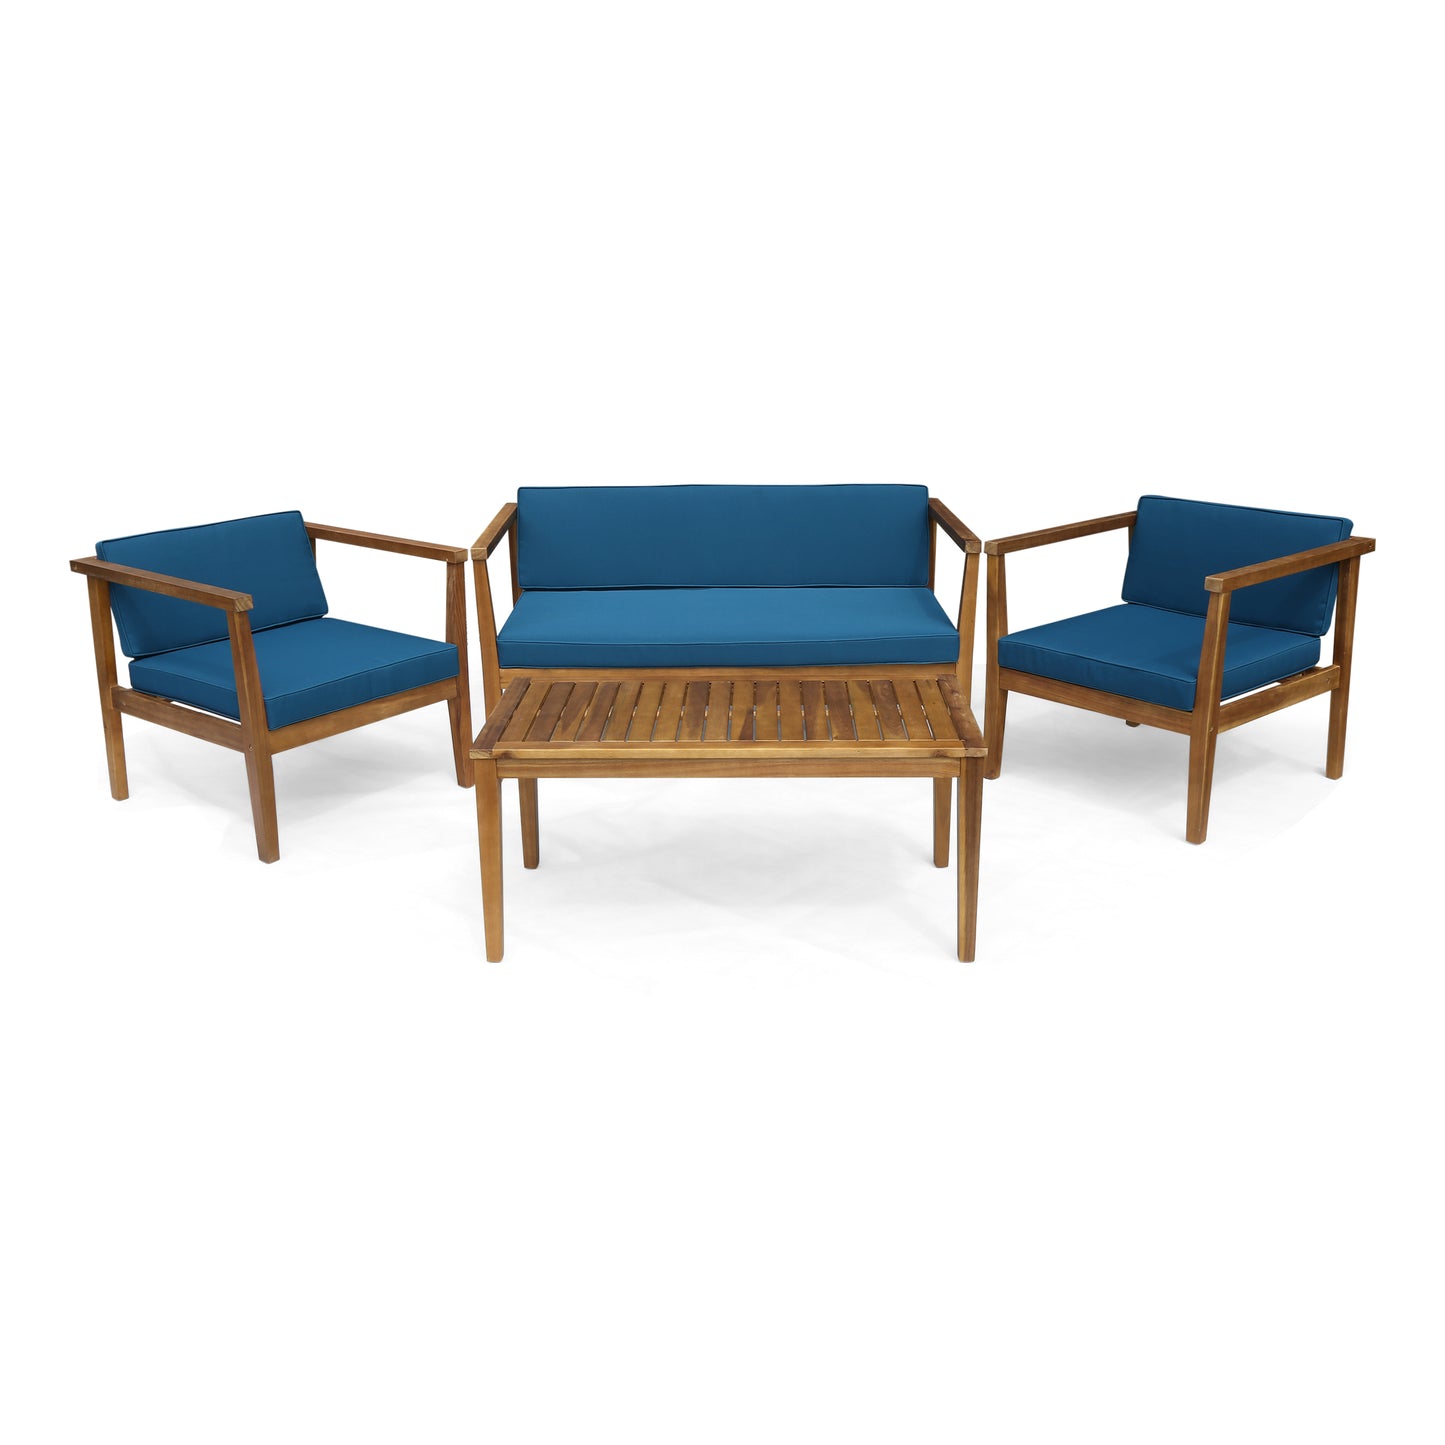 Maddox Outdoor 4-Seater Acacia Wood Chat Set with Coffee Table